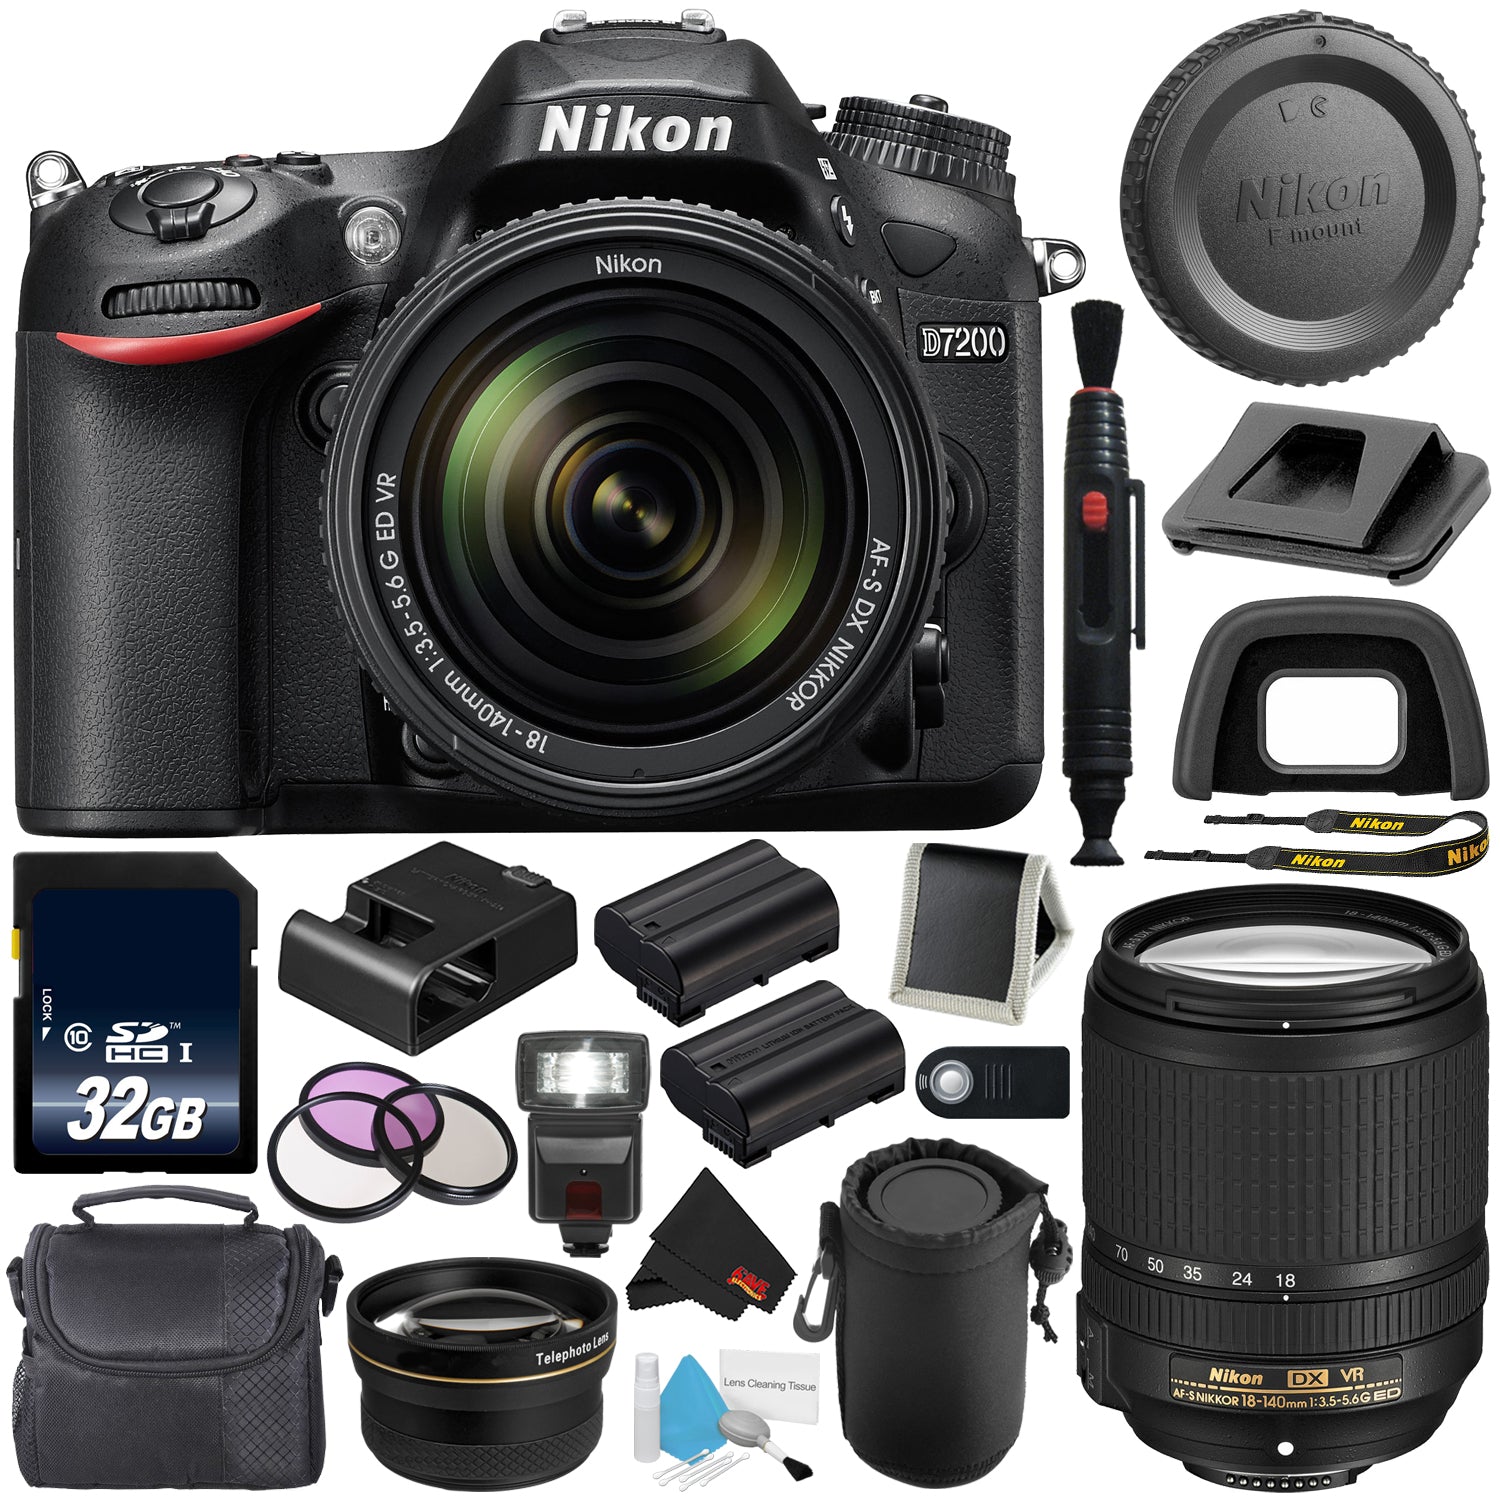 Nikon D7200 DSLR Camera with 18-140mm Lens 1555 (International Model) + EN-EL15 Replacement Li-on Battery + 32GB SDHC Class 10 Memory Card + Wireless Remote + Deluxe Cleaning Kit Bundle